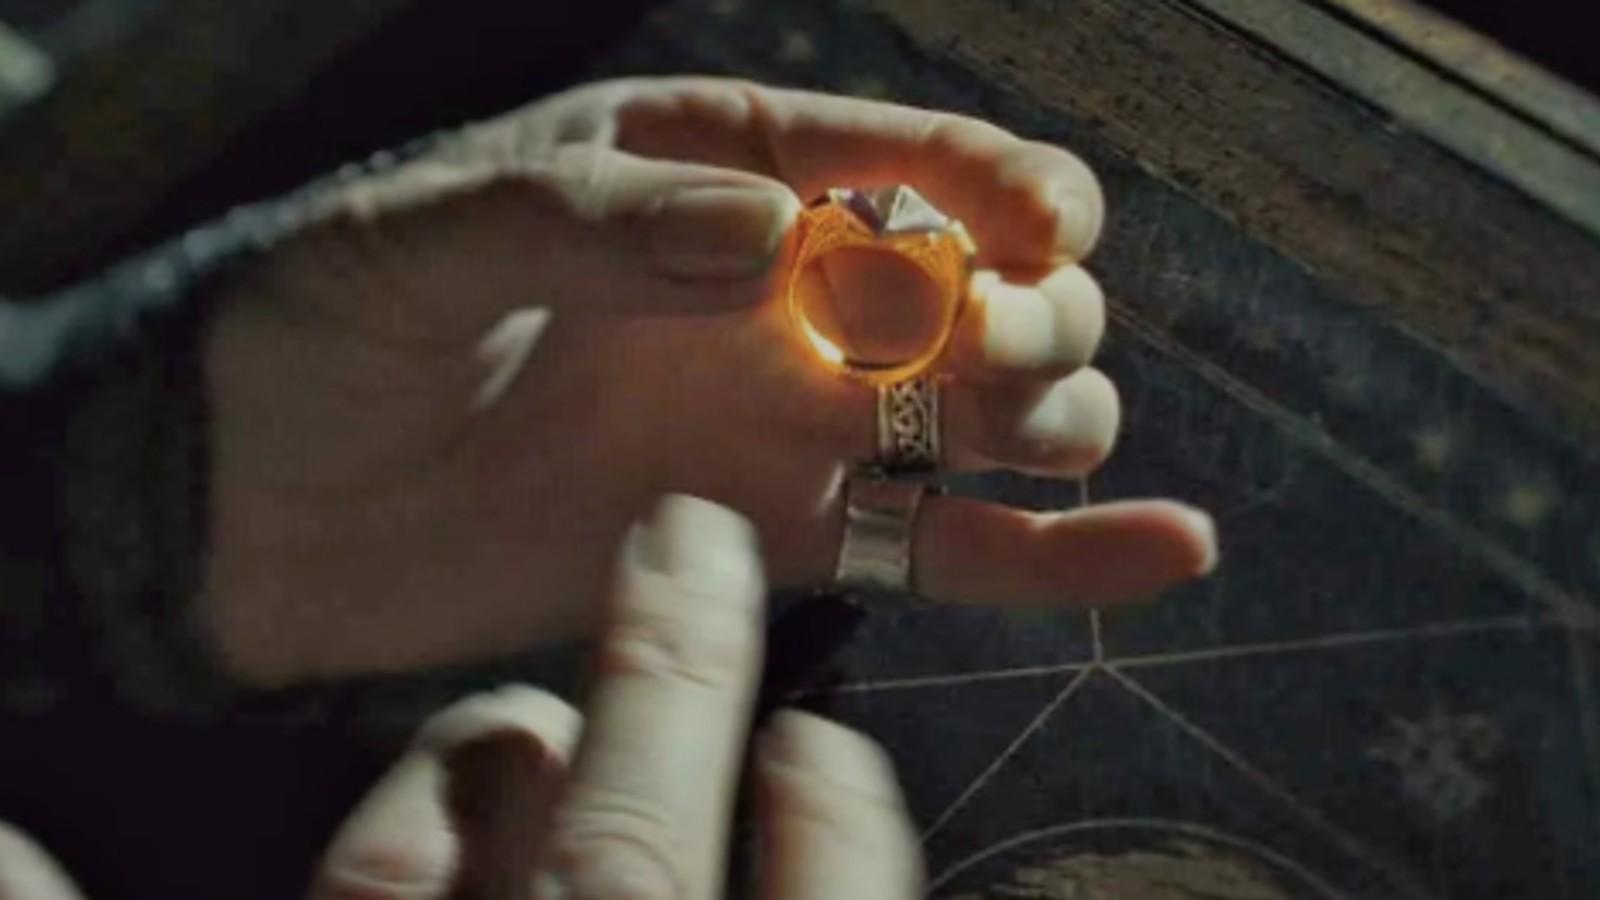 Dumbledore holds Voldemort's Horcrux ring